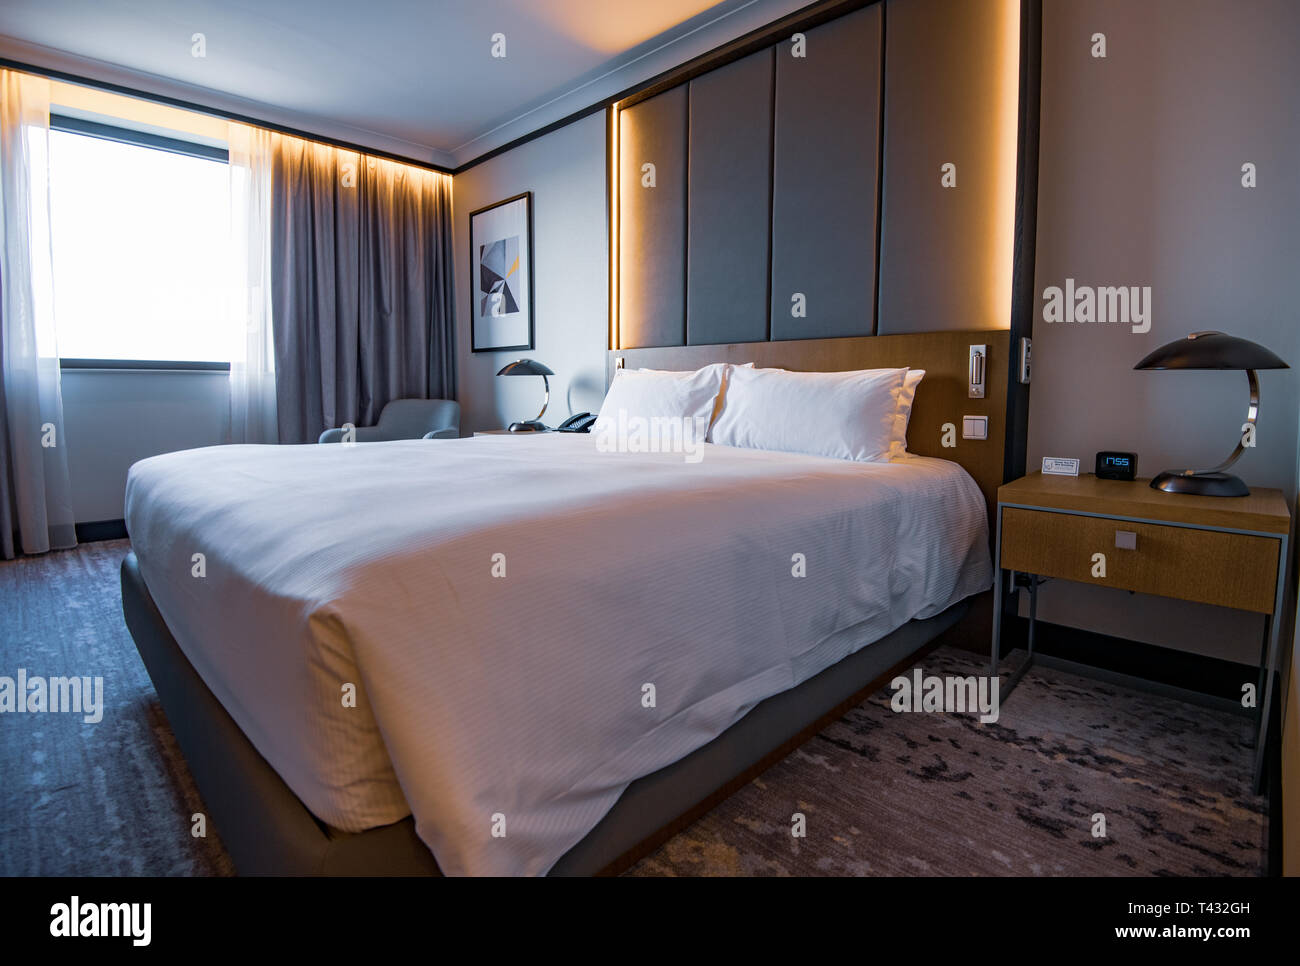 PRAGUE, CZECHIA - 9TH ARPIL 2019: Pictures of a generic hotel room - Bed, window, table, lamps all in shot. Stock Photo